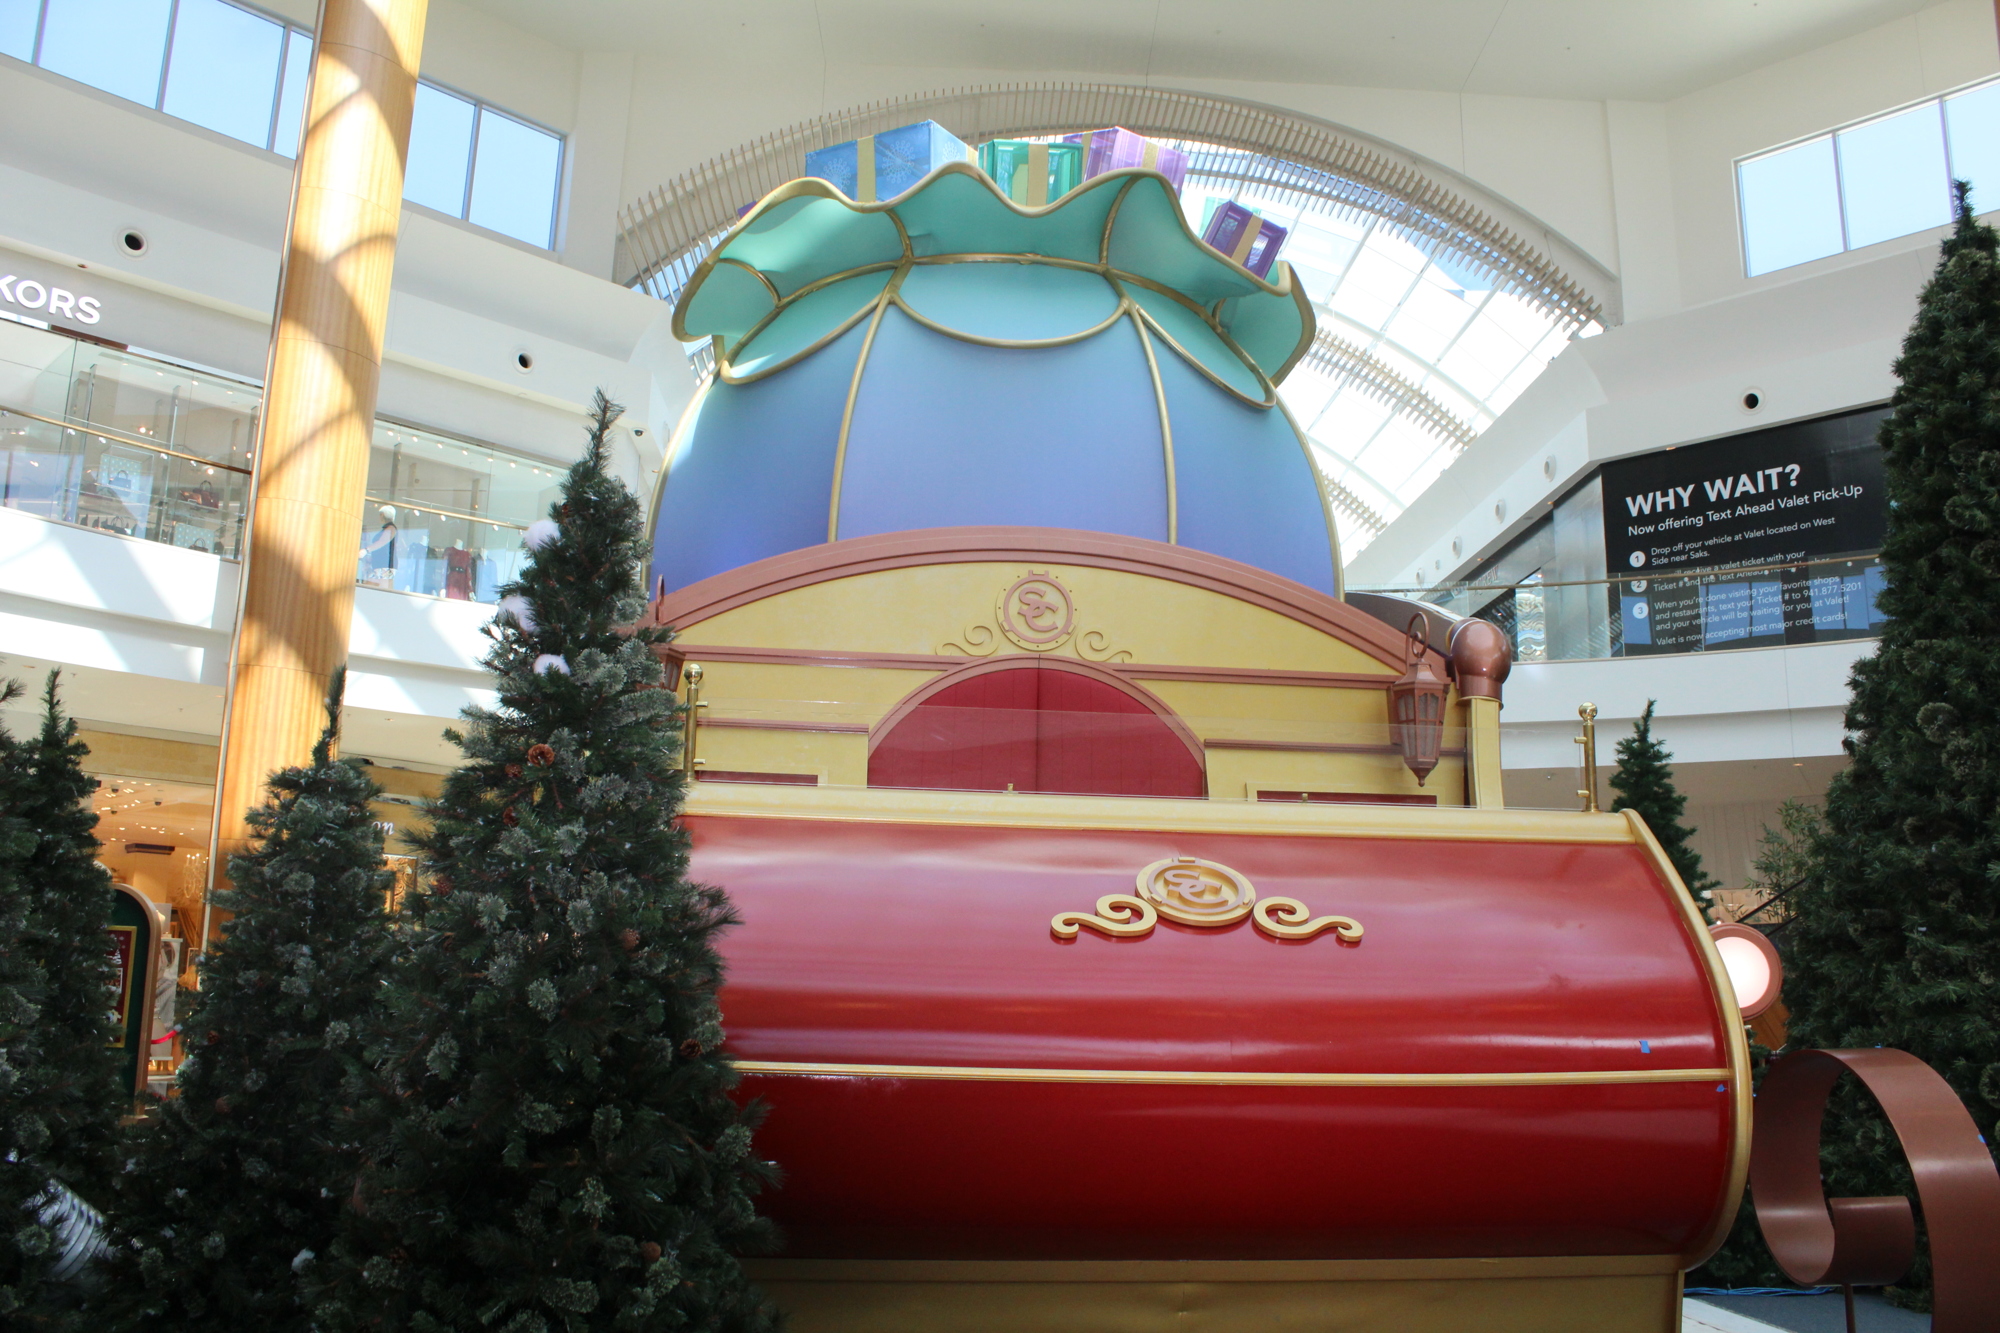 Santa's sleigh, located in the center of the Mall at University Town Center, is the centerpiece of Santa's Flight Academy.